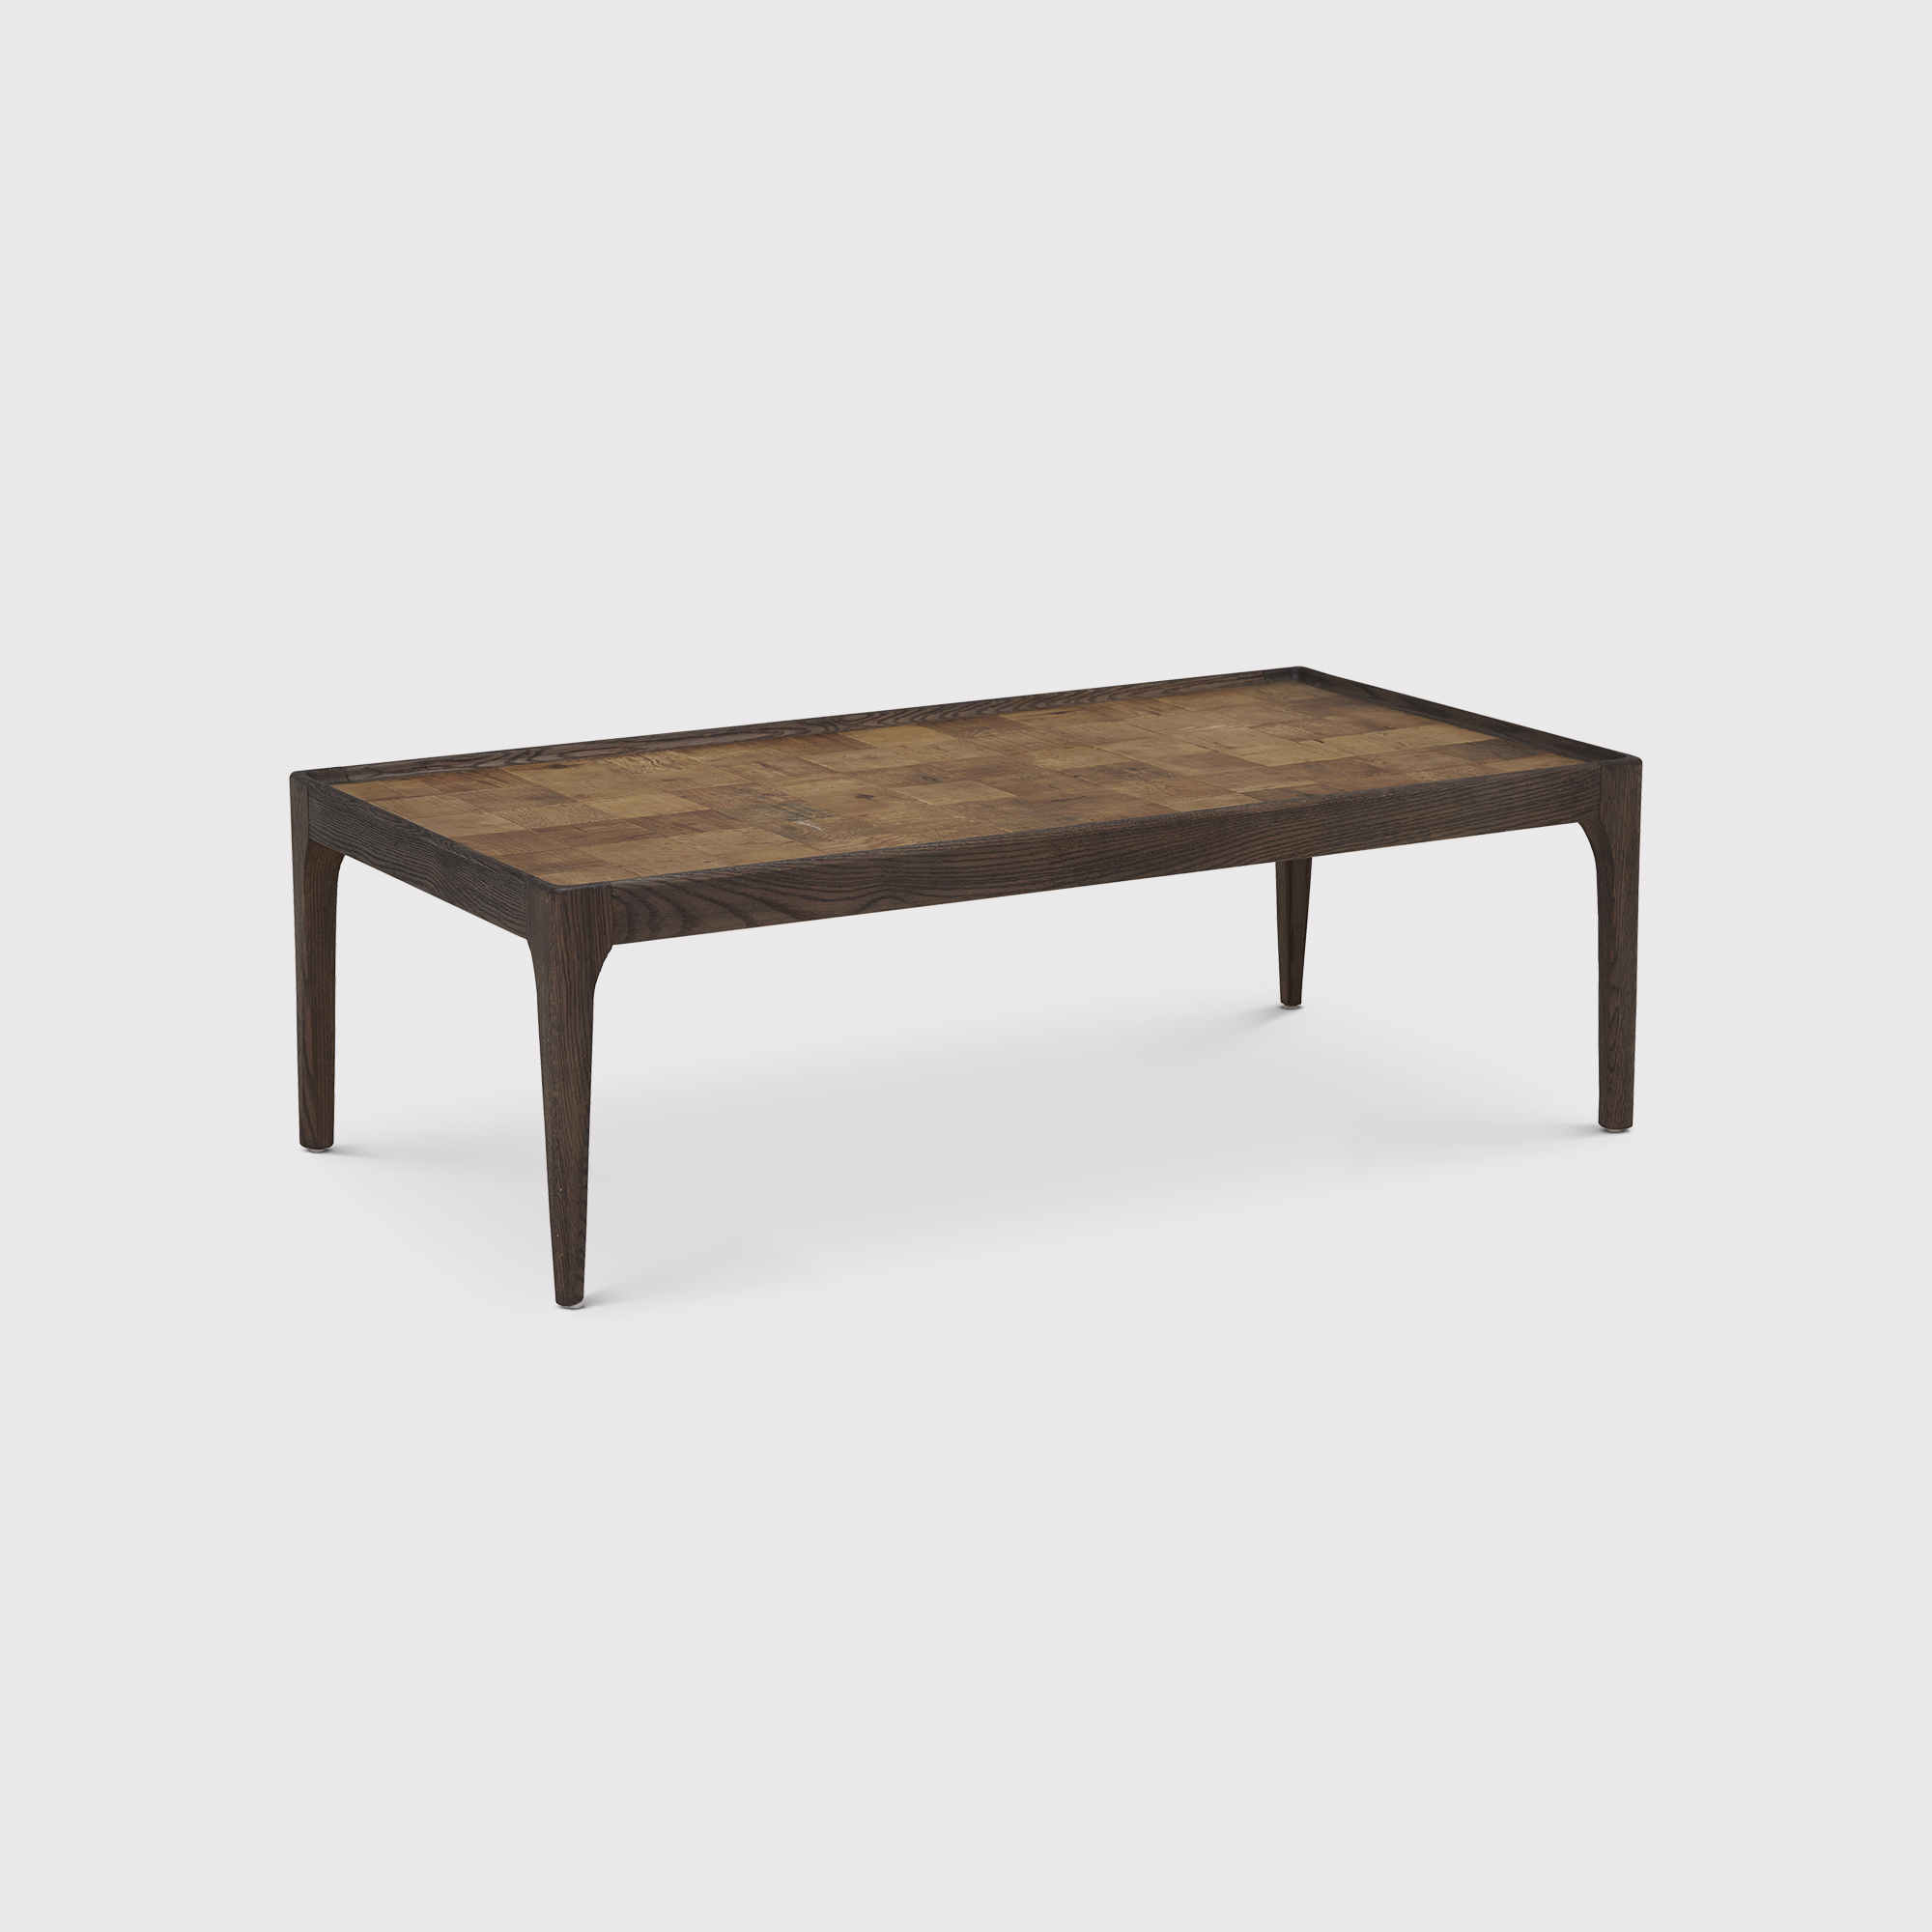 Jude Coffee Table With Inlay, Brown Oak | Barker & Stonehouse